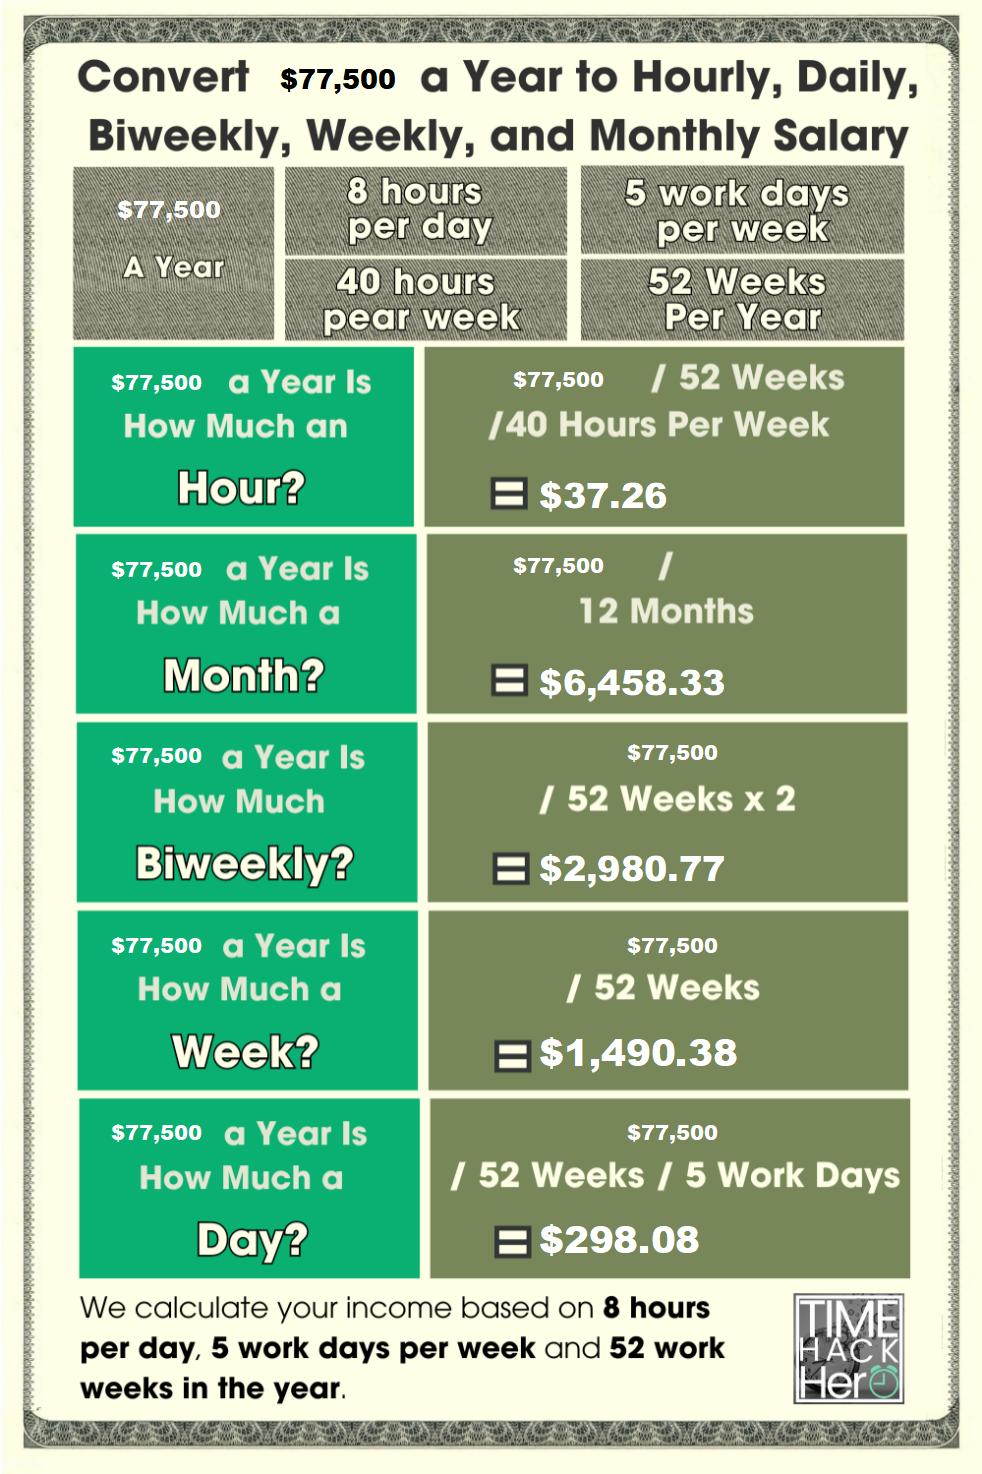 Convert $77500 a Year to Hourly, Daily, Biweekly, Weekly, and Monthly Salary